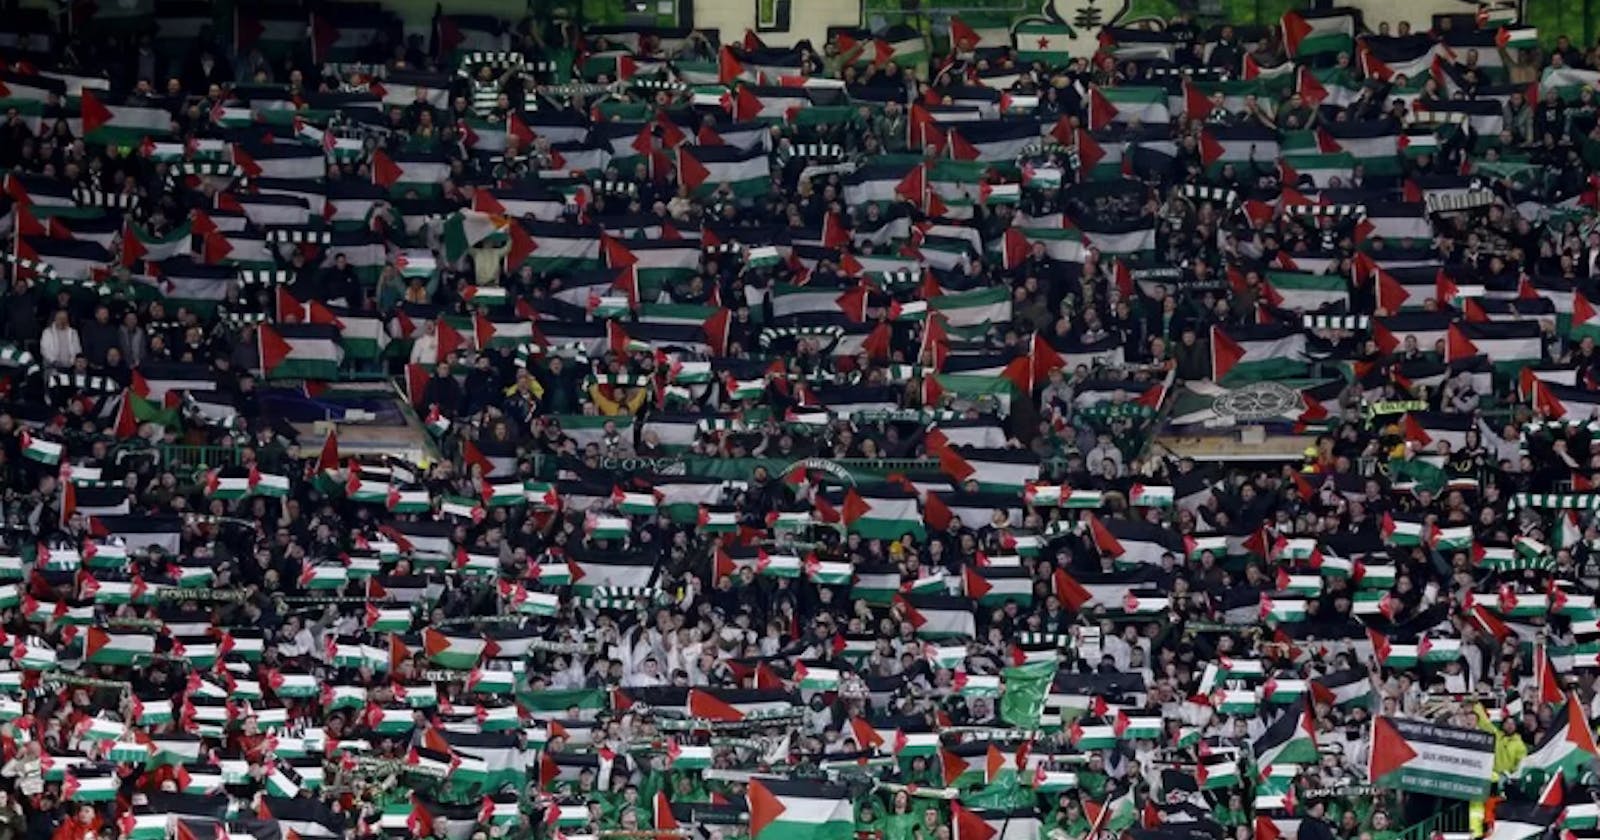 Celtic fans defy club appeal over Palestinian flag display